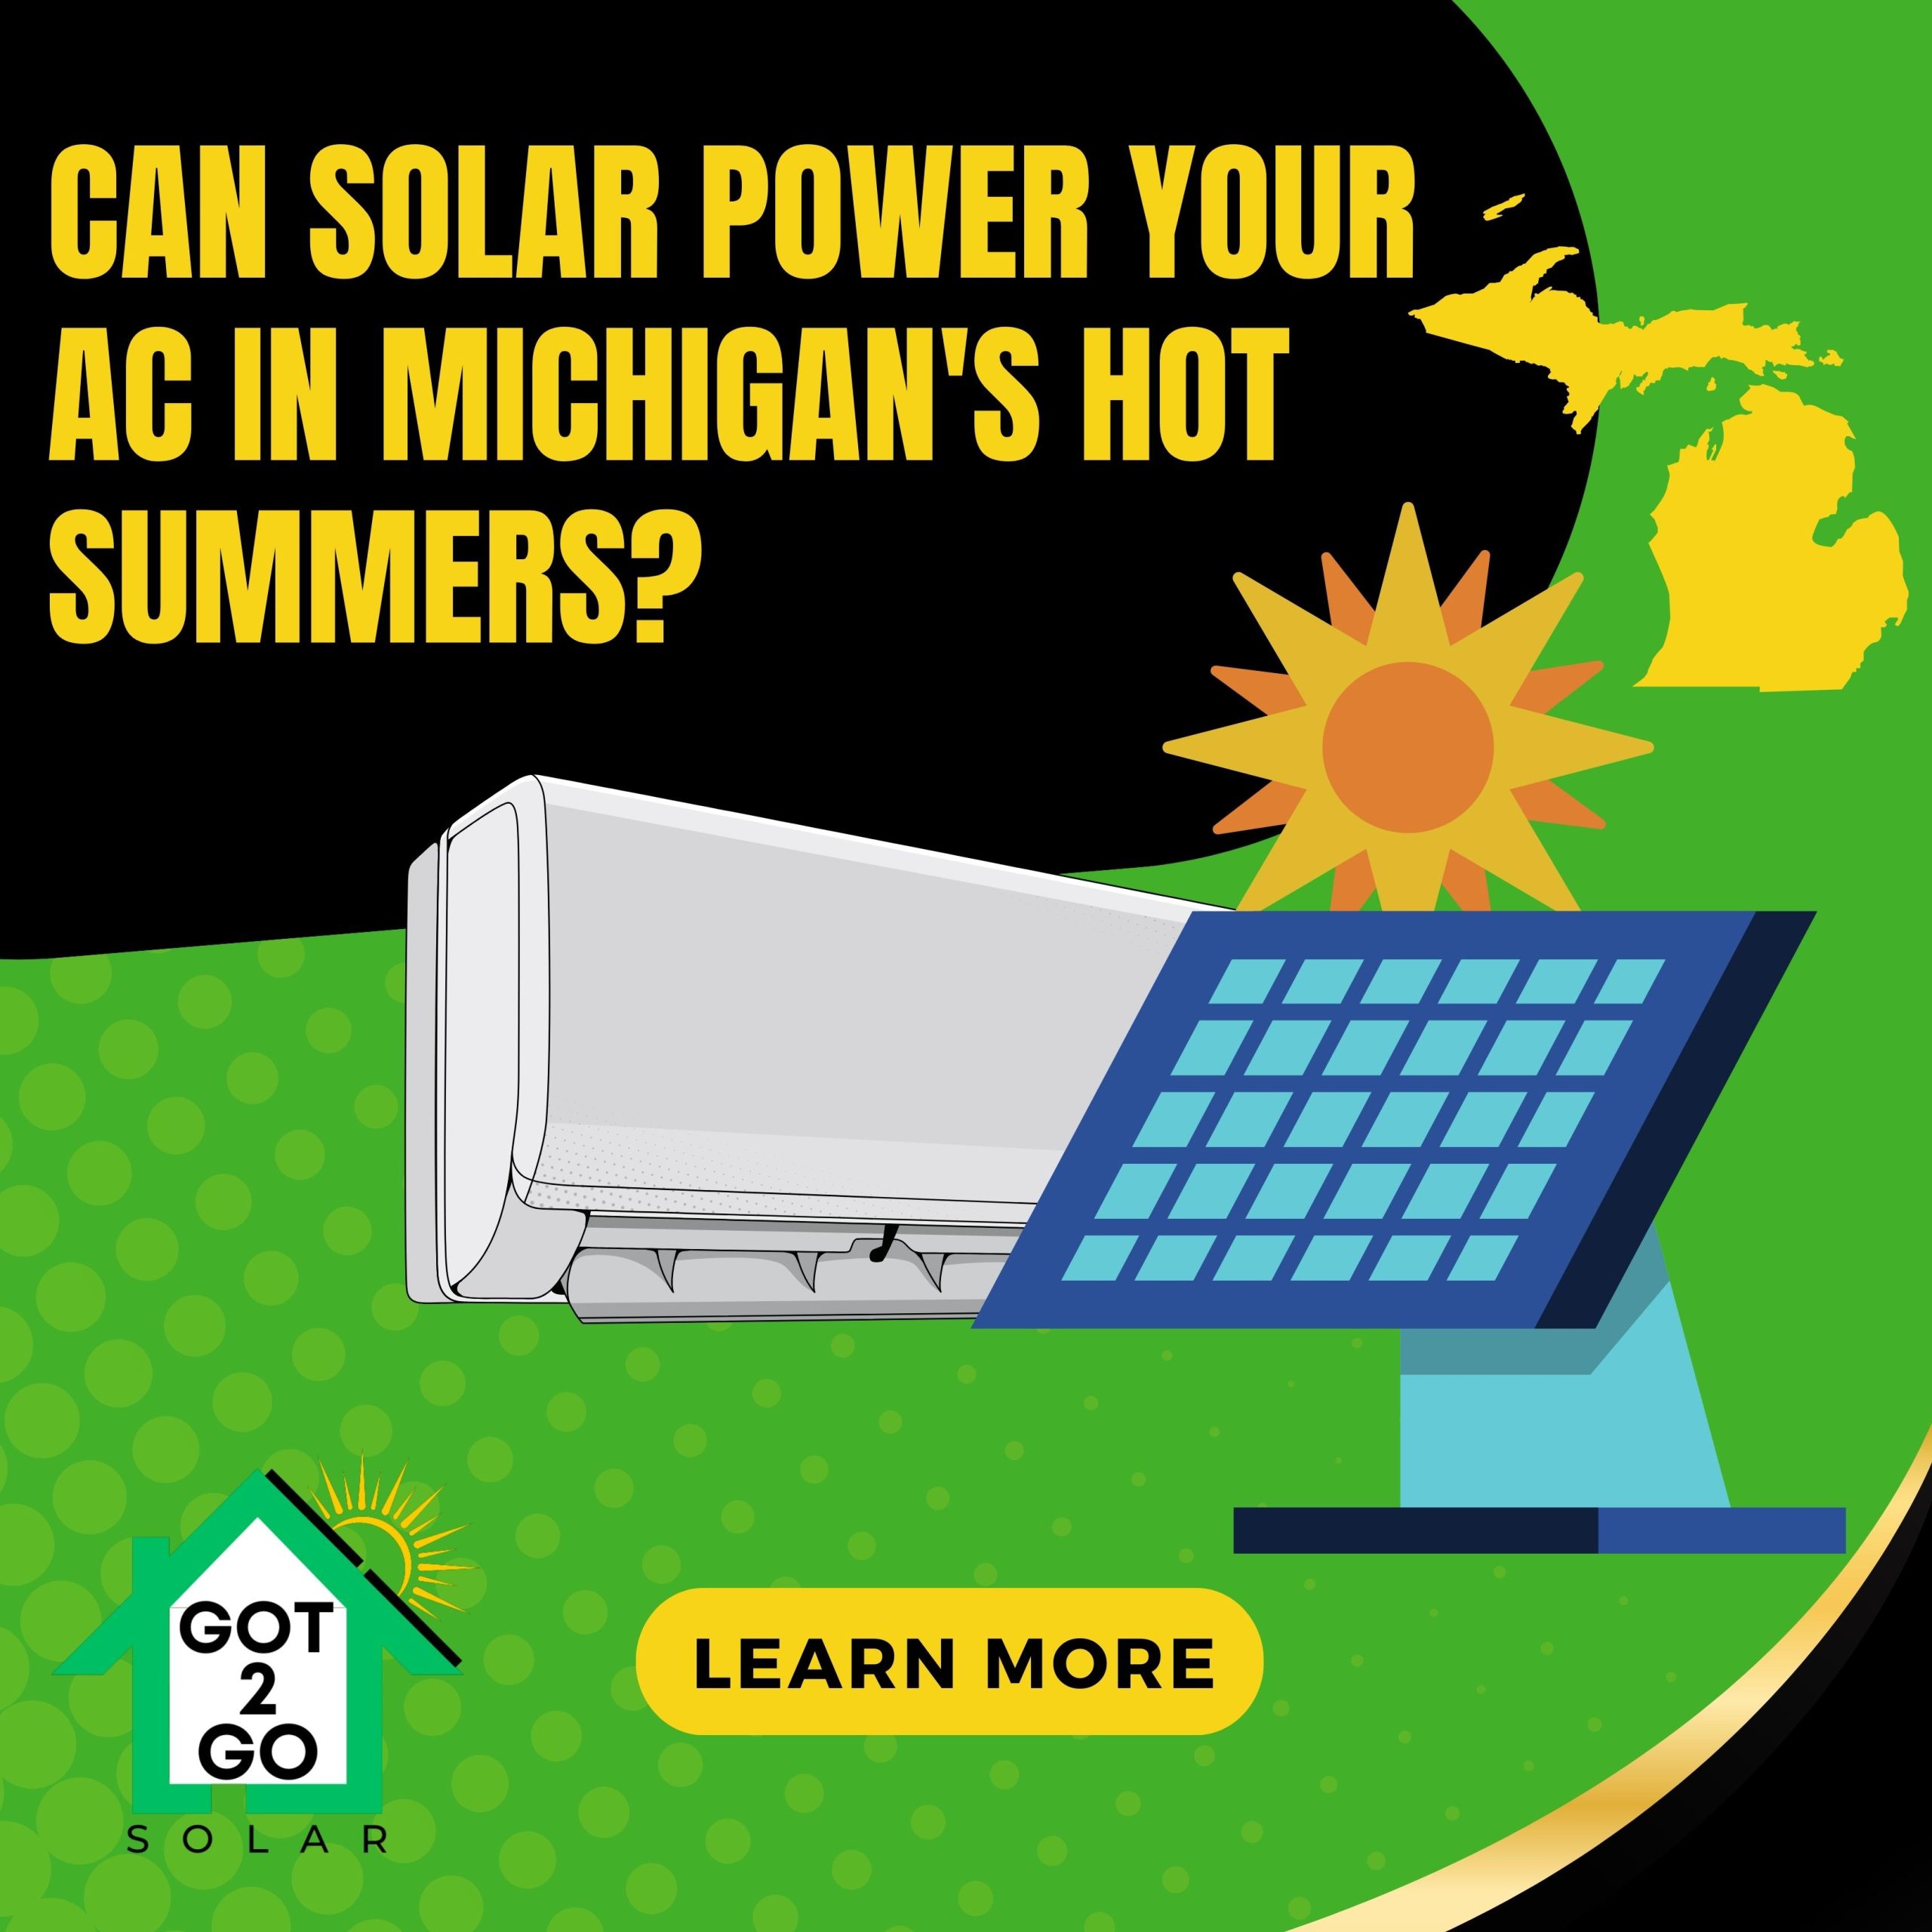 Can Solar Power Your AC in Michigan's Hot Summers?